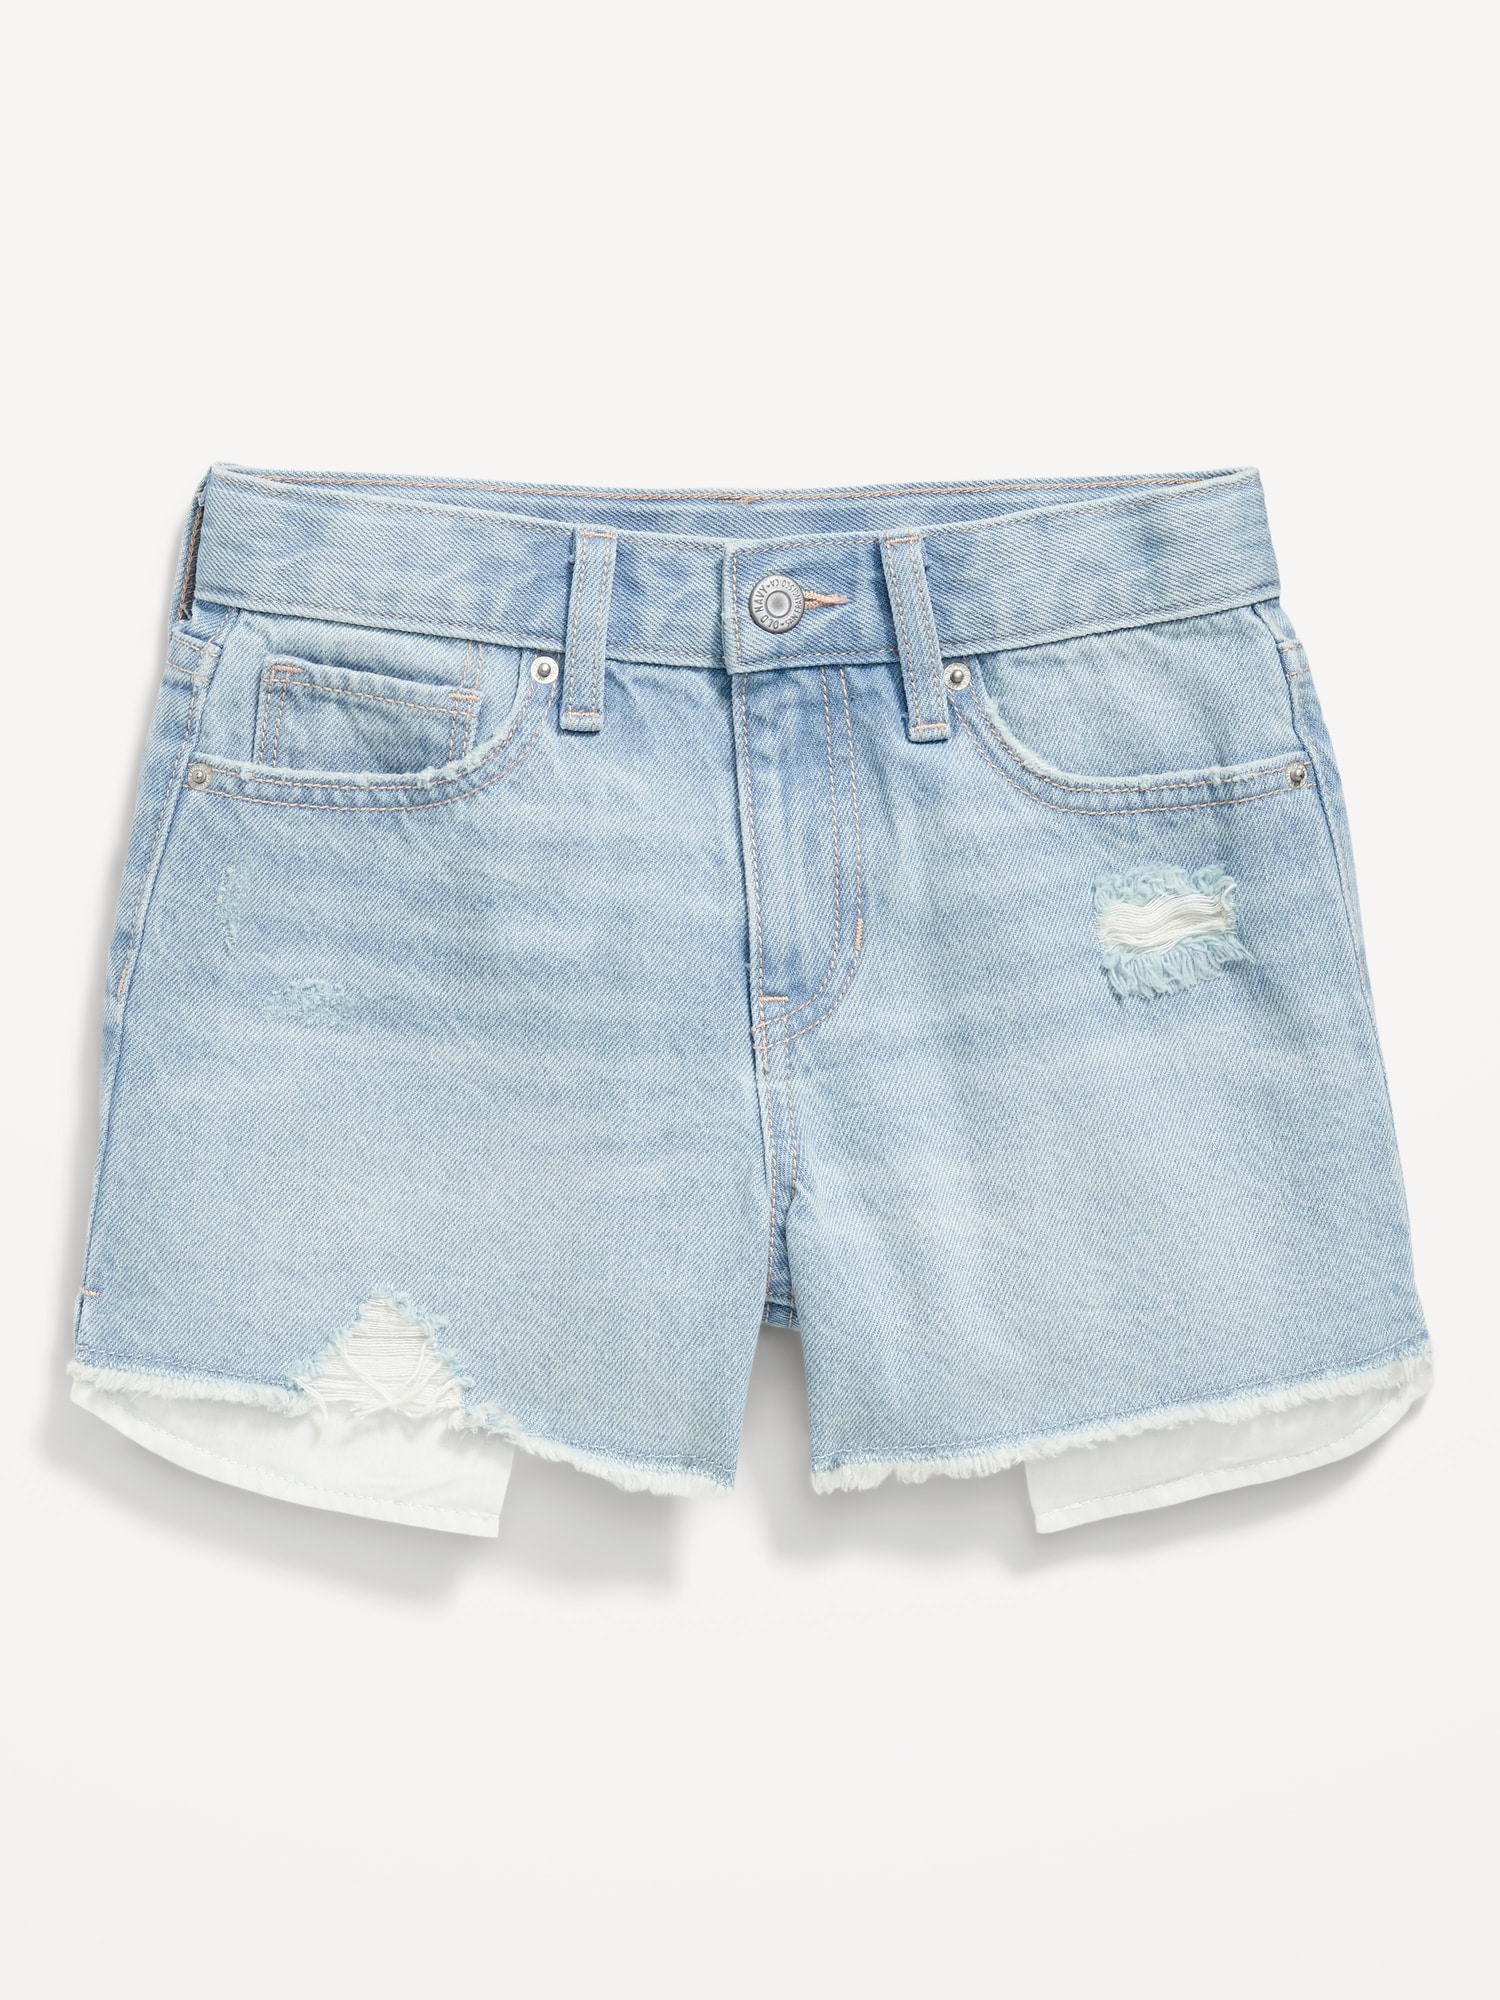 High-Waisted Ripped Jean Shorts for Girls | Old Navy